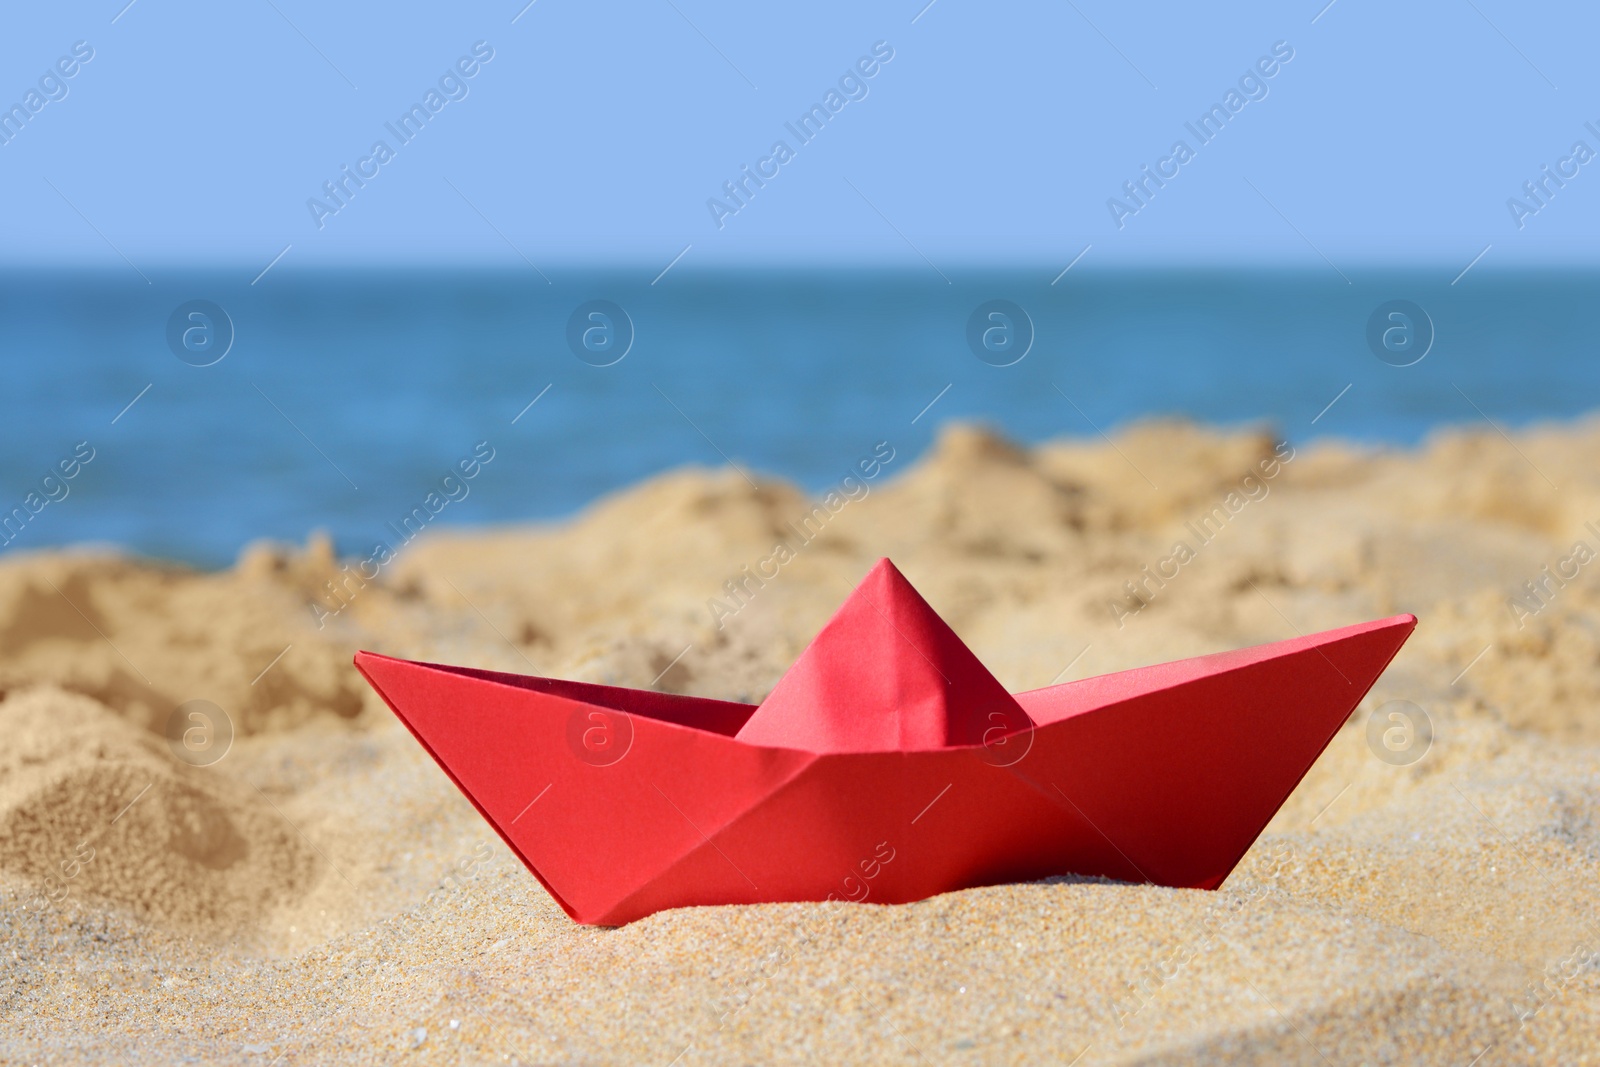 Photo of Red paper boat near sea on sunny day